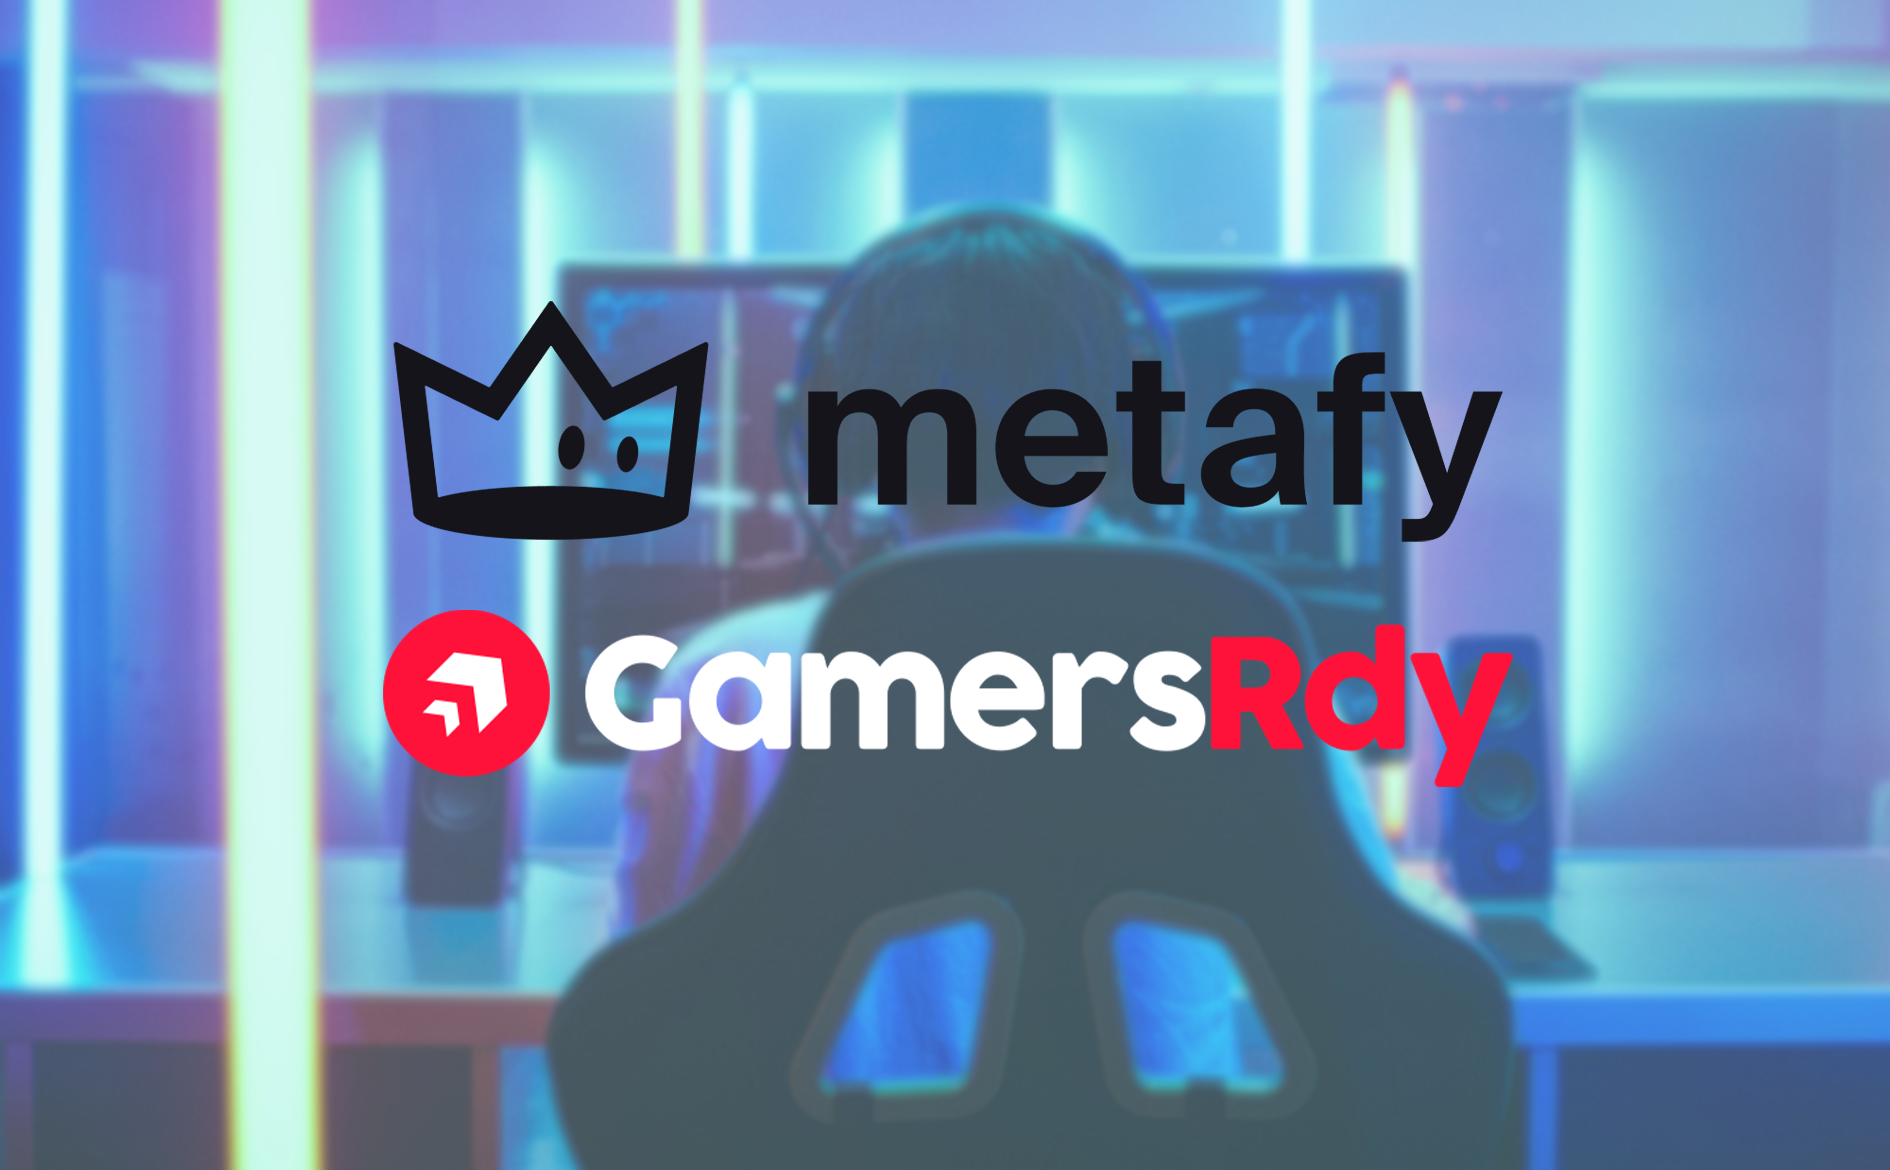 Metafy announces acquisition of GamersRdy